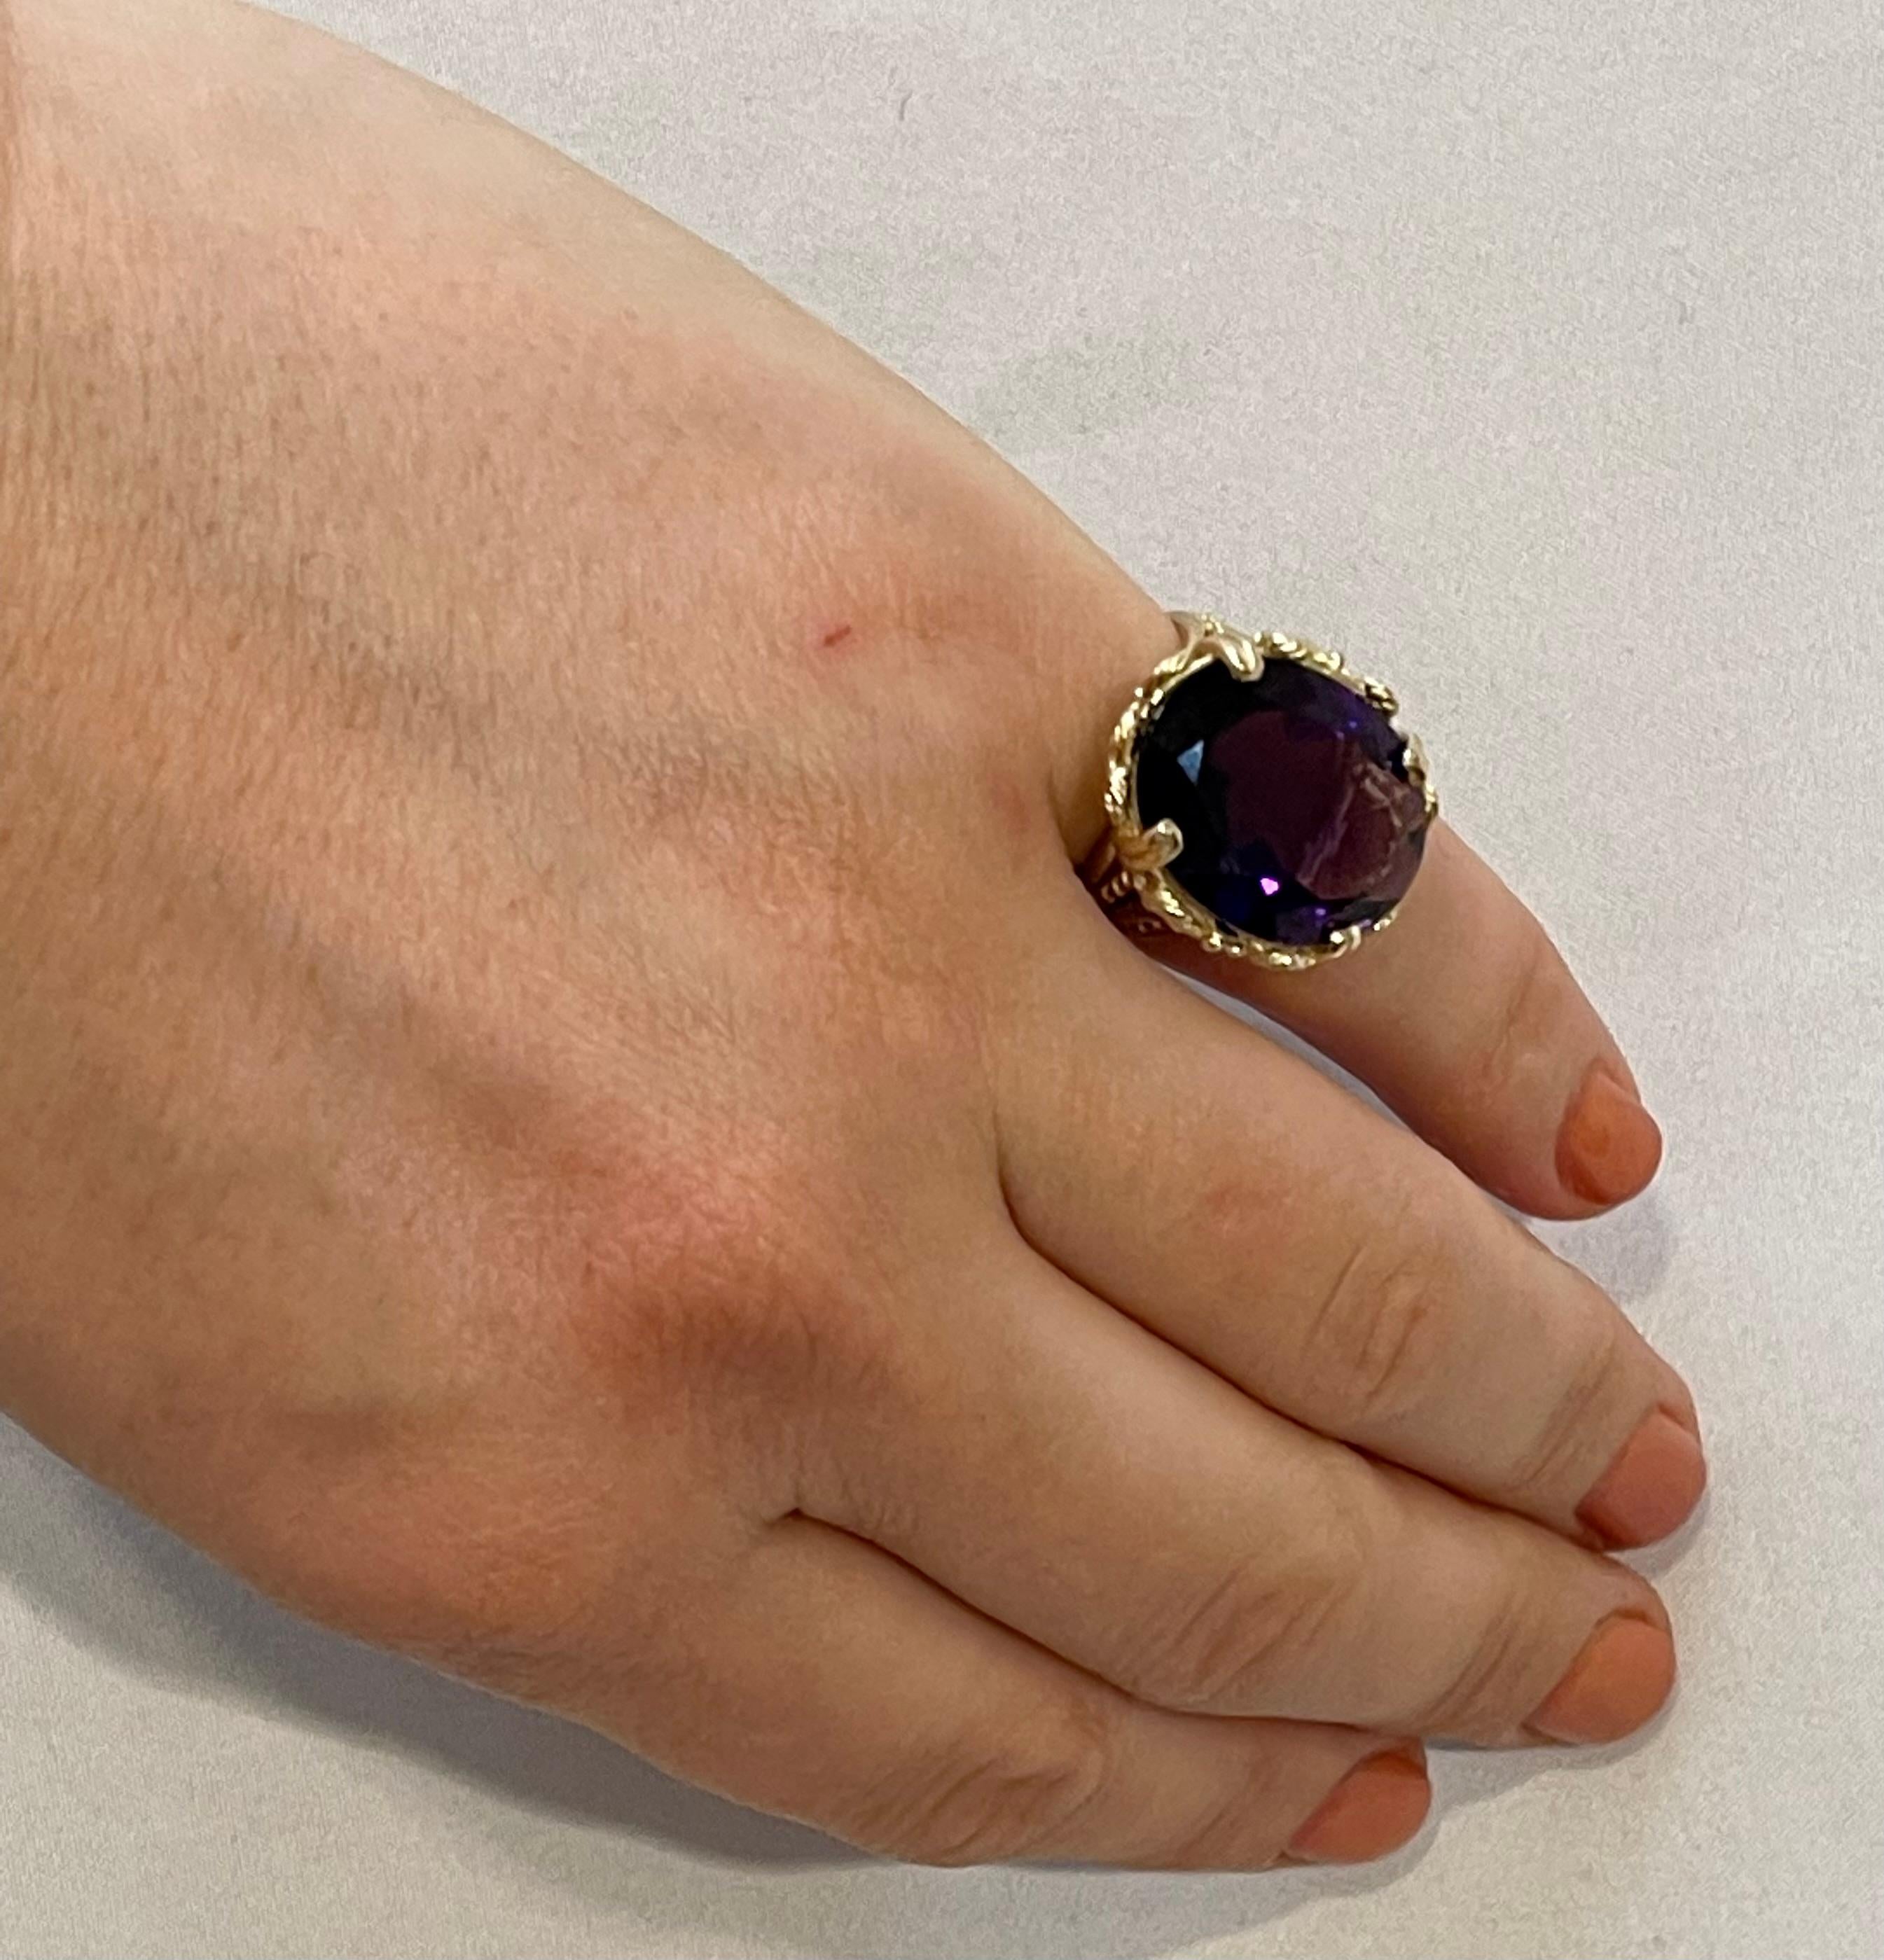 13 Carat Oval Bolivian Amethyst Cocktail Ring in 14 Karat Yellow Gold For Sale 6